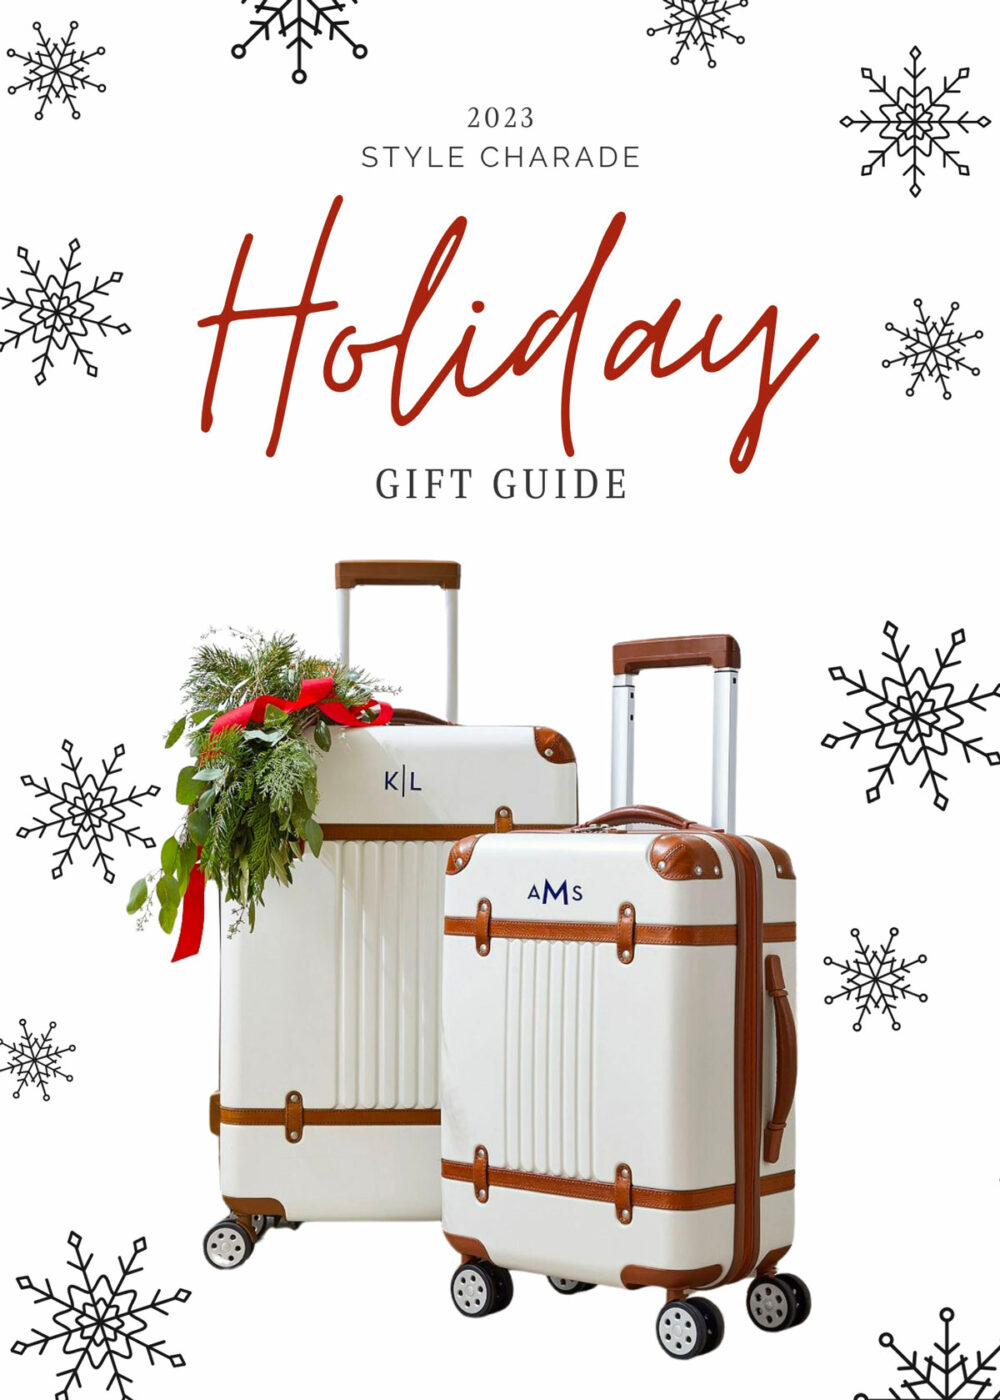 Style Charade Holiday Gift Guide 2023